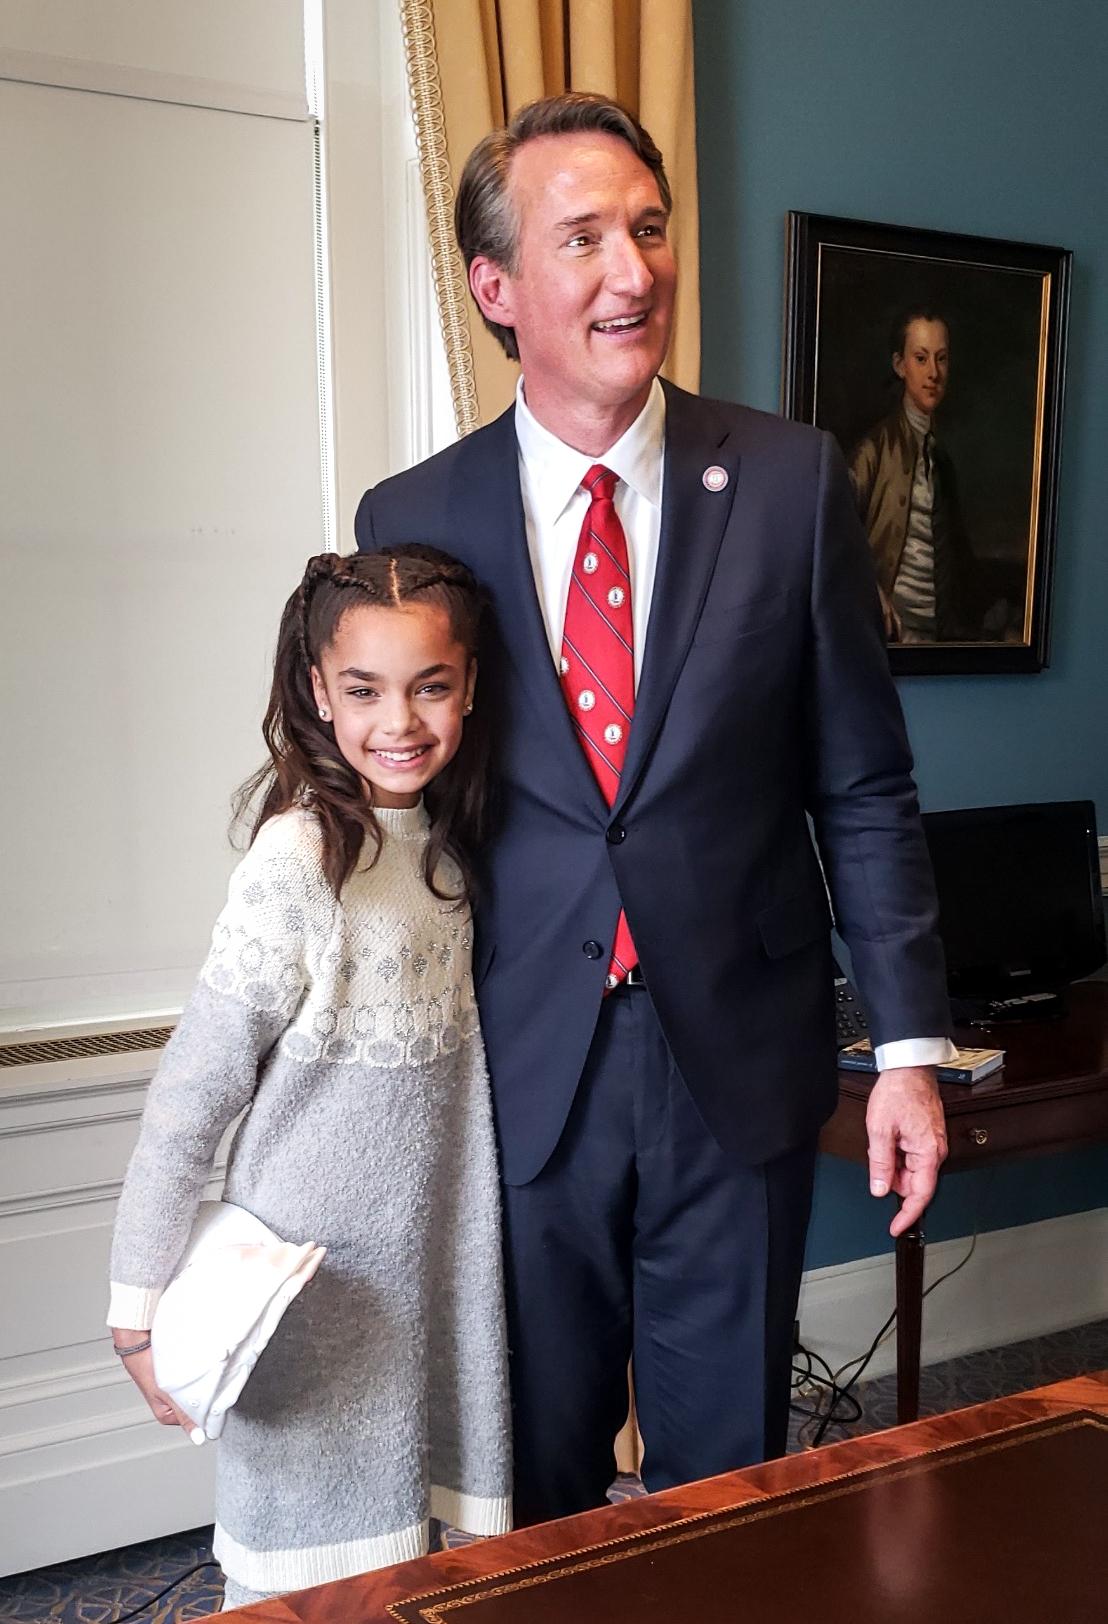 Shawntel Cooper’s daughter Khloe with Virginia governor Glenn Youngkin in Youngkin’s office in Richmond, Va., on Jan. 15, 2022. (Courtesy of Shawntel Cooper)